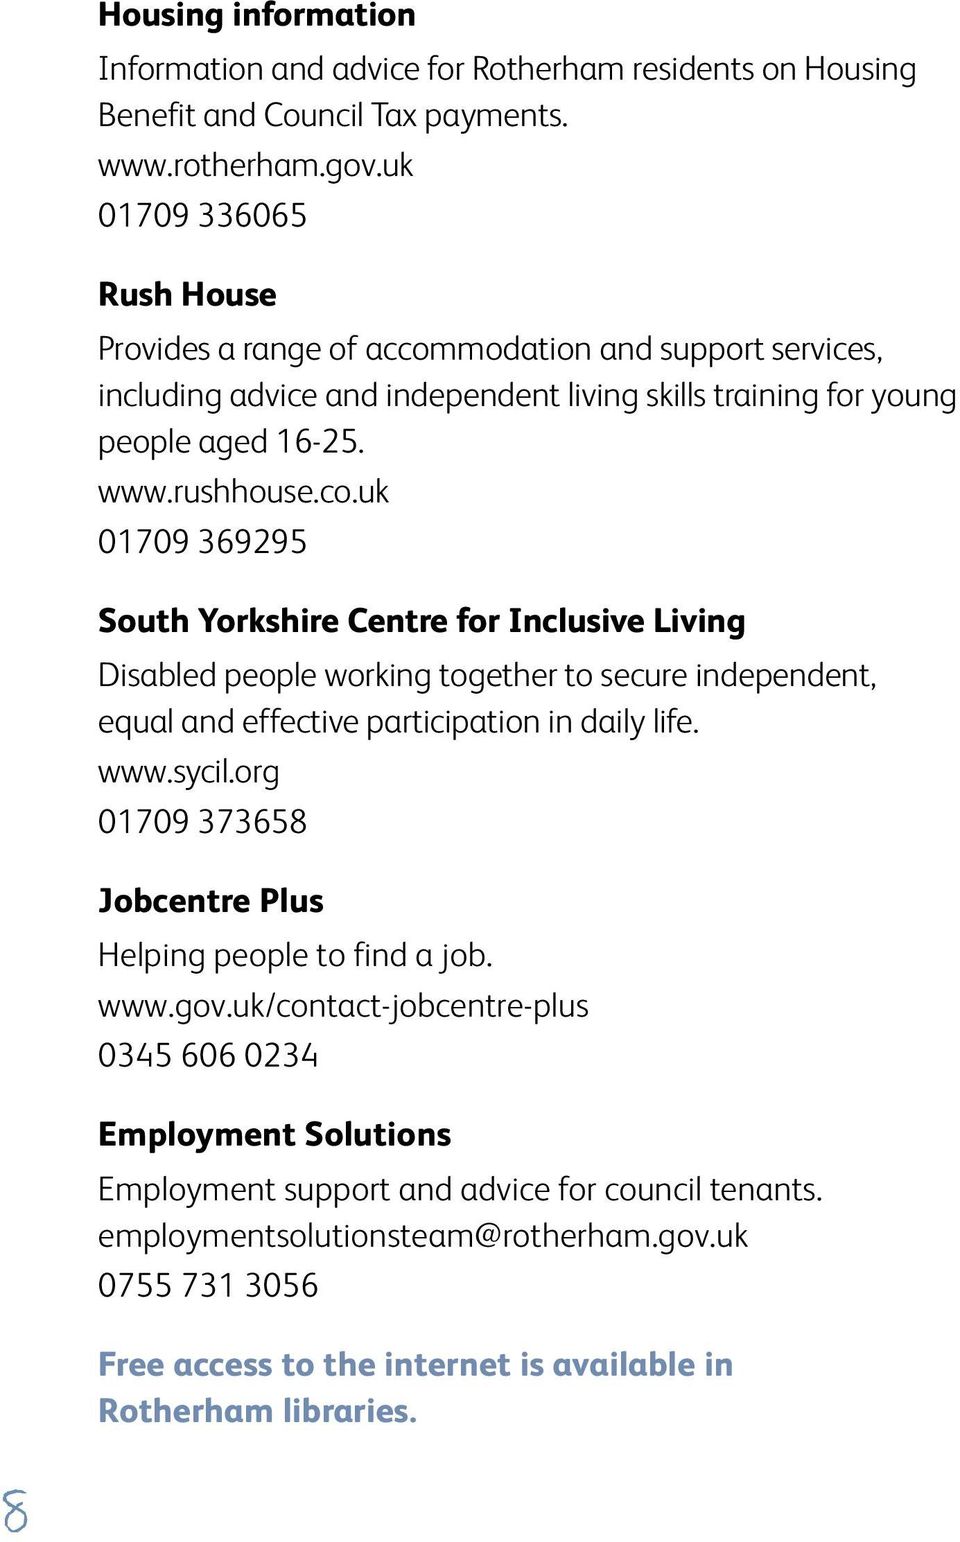 modation and support services, including advice and independent living skills training for young people aged 16-25. www.rushhouse.co.